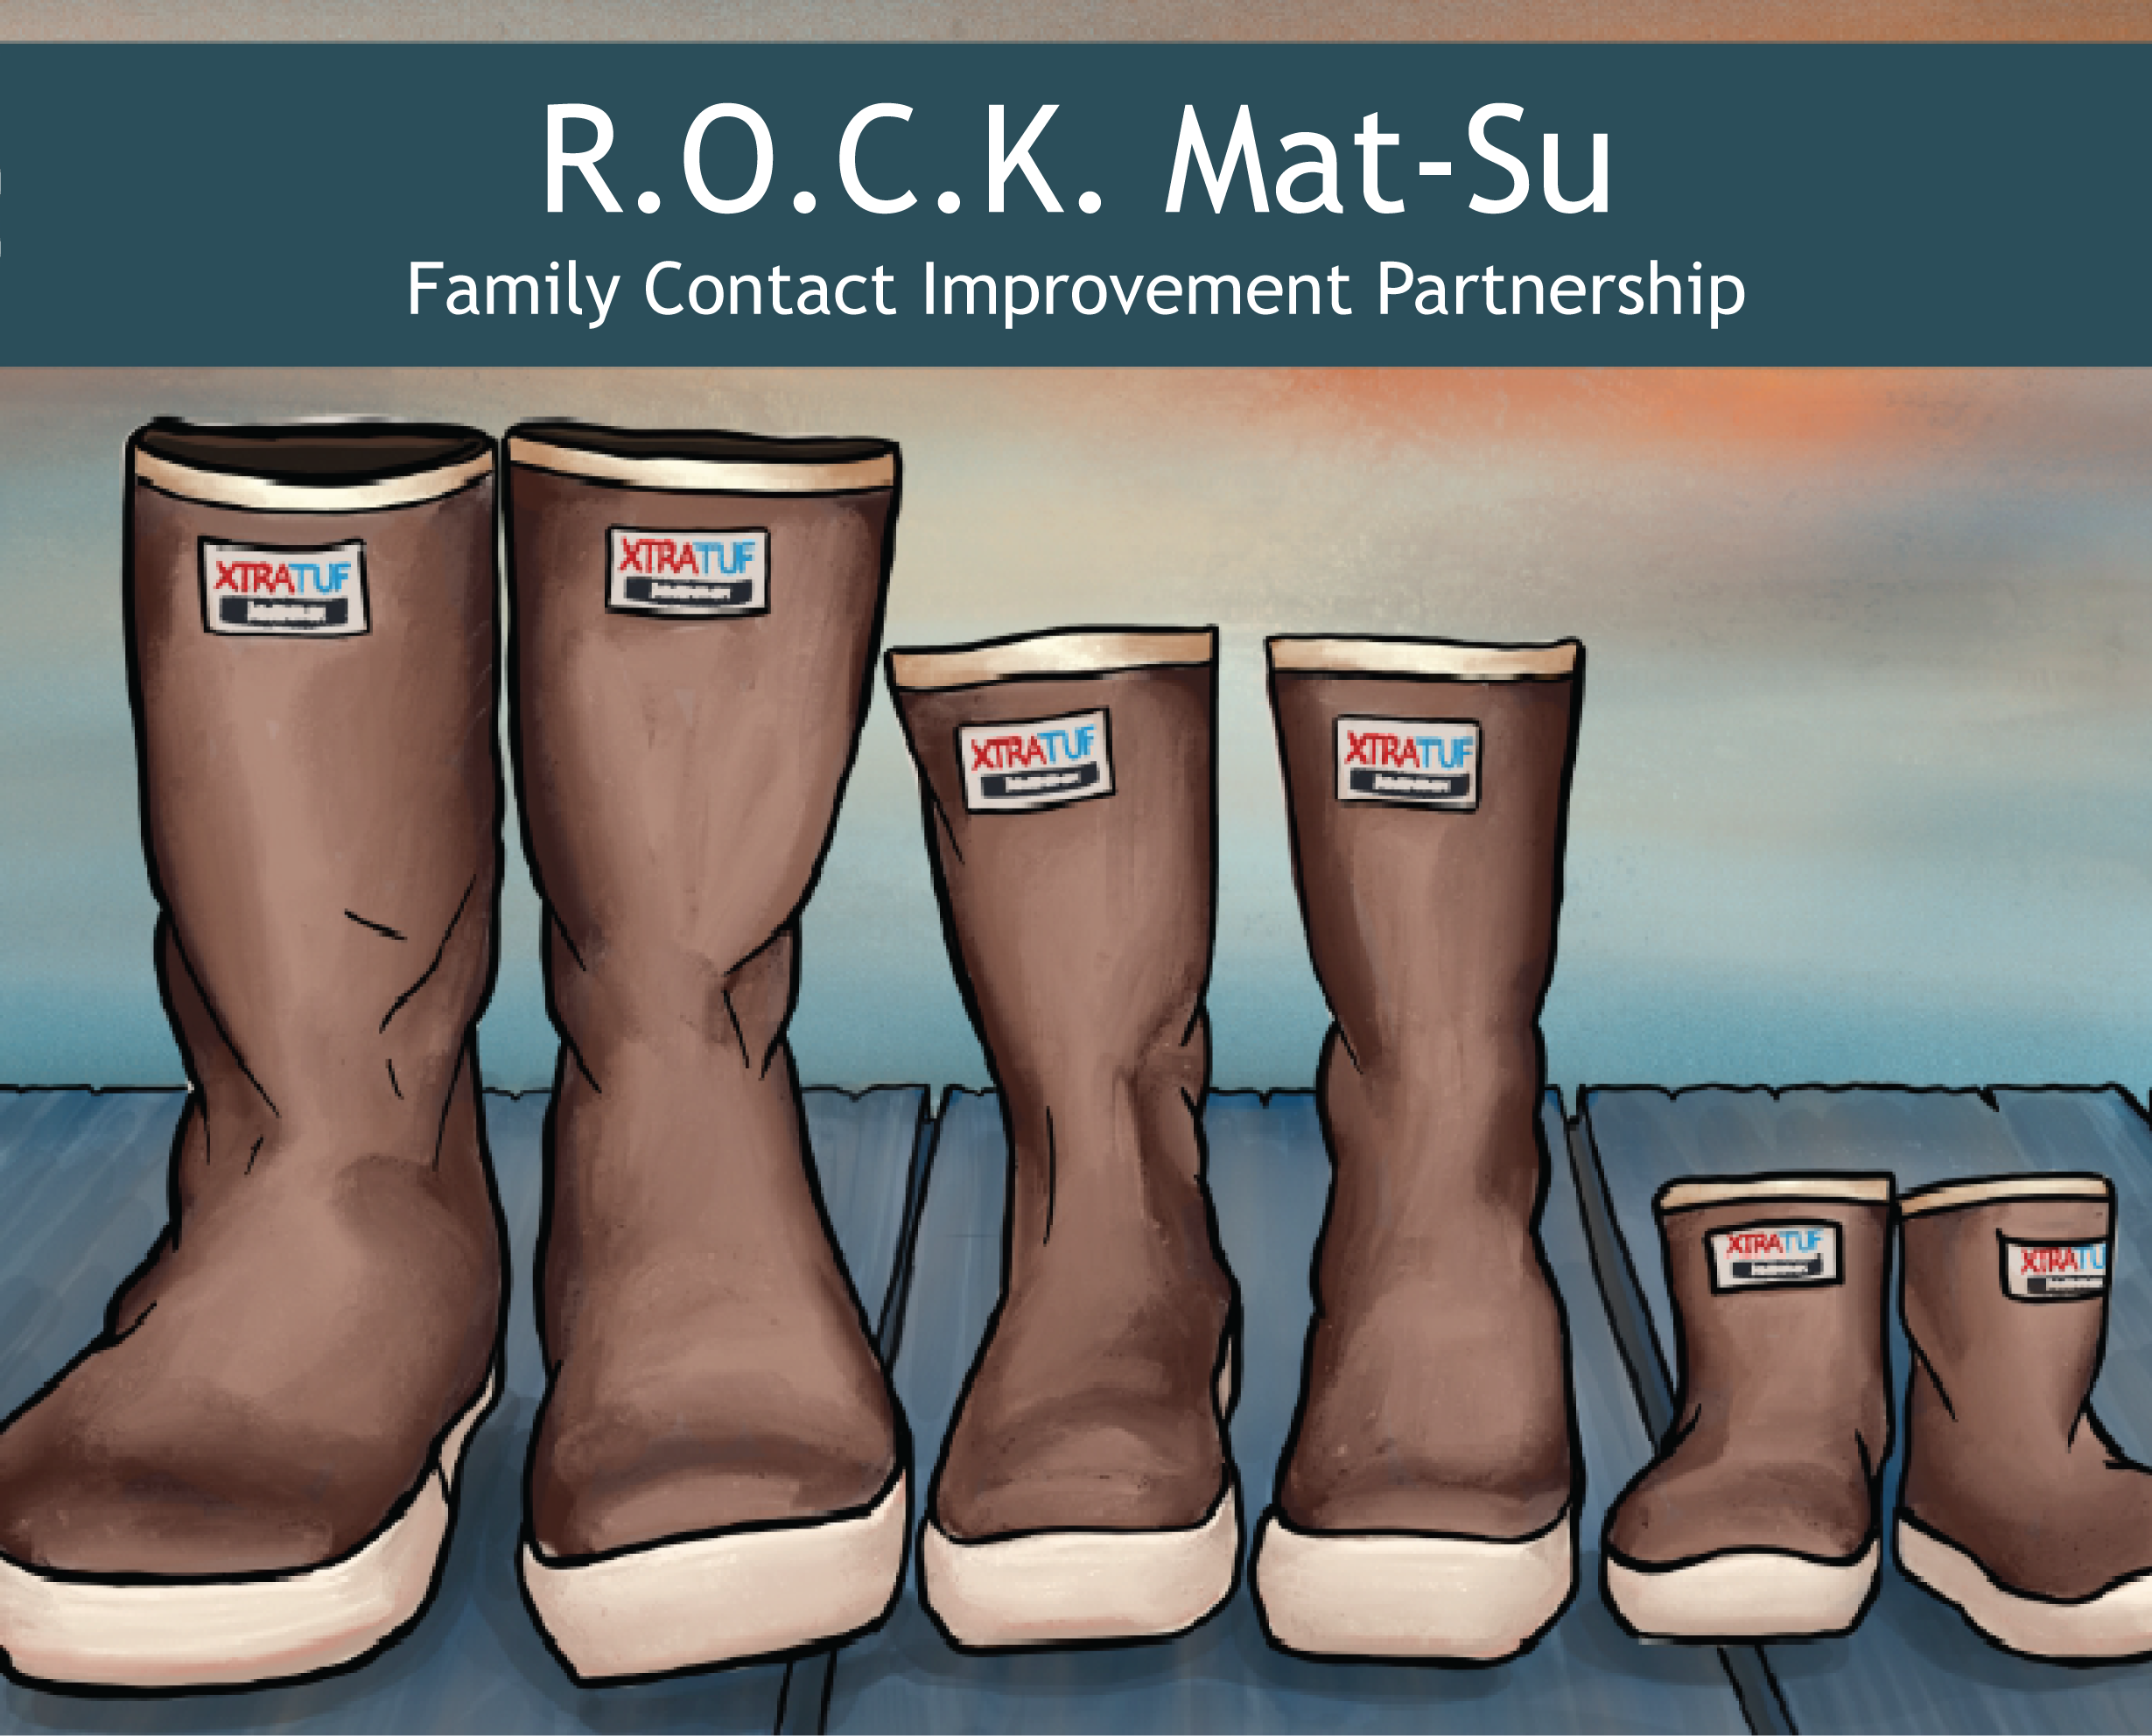 R.O.C.K. Mat-Su Family Contact Improvement Partnership three pairs of boots of descending size 